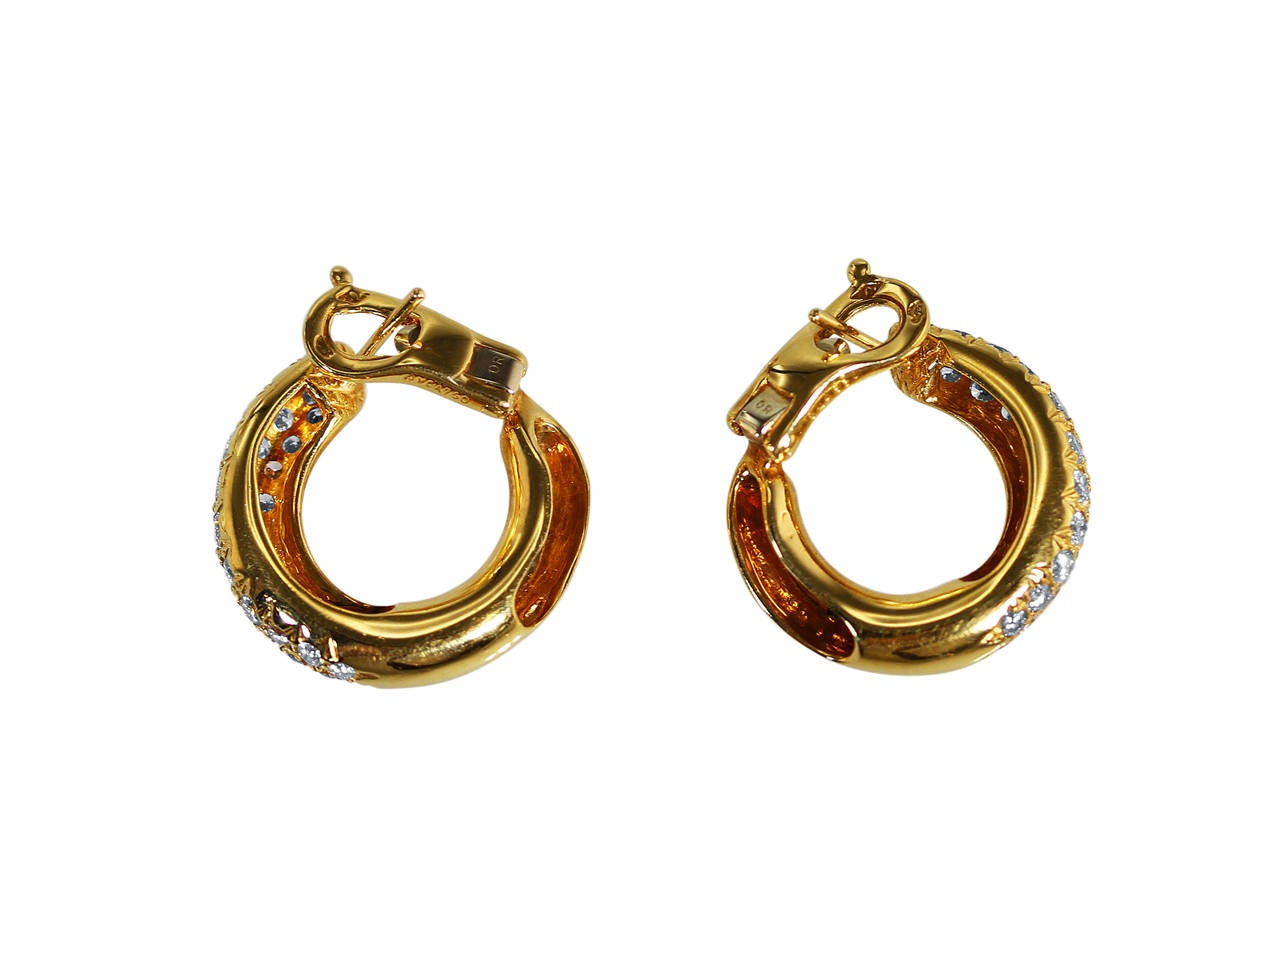 A pair of 18 karat gold and diamond hoop earrings by Van Cleef & Arpels, France, the fronts pavé-set with 68 round diamonds weighing approximately 1.50 carats, gross weight 9.2 grams, measuring 3/4 by 3/4 inch, signed VCA, numbered BL4633, marked